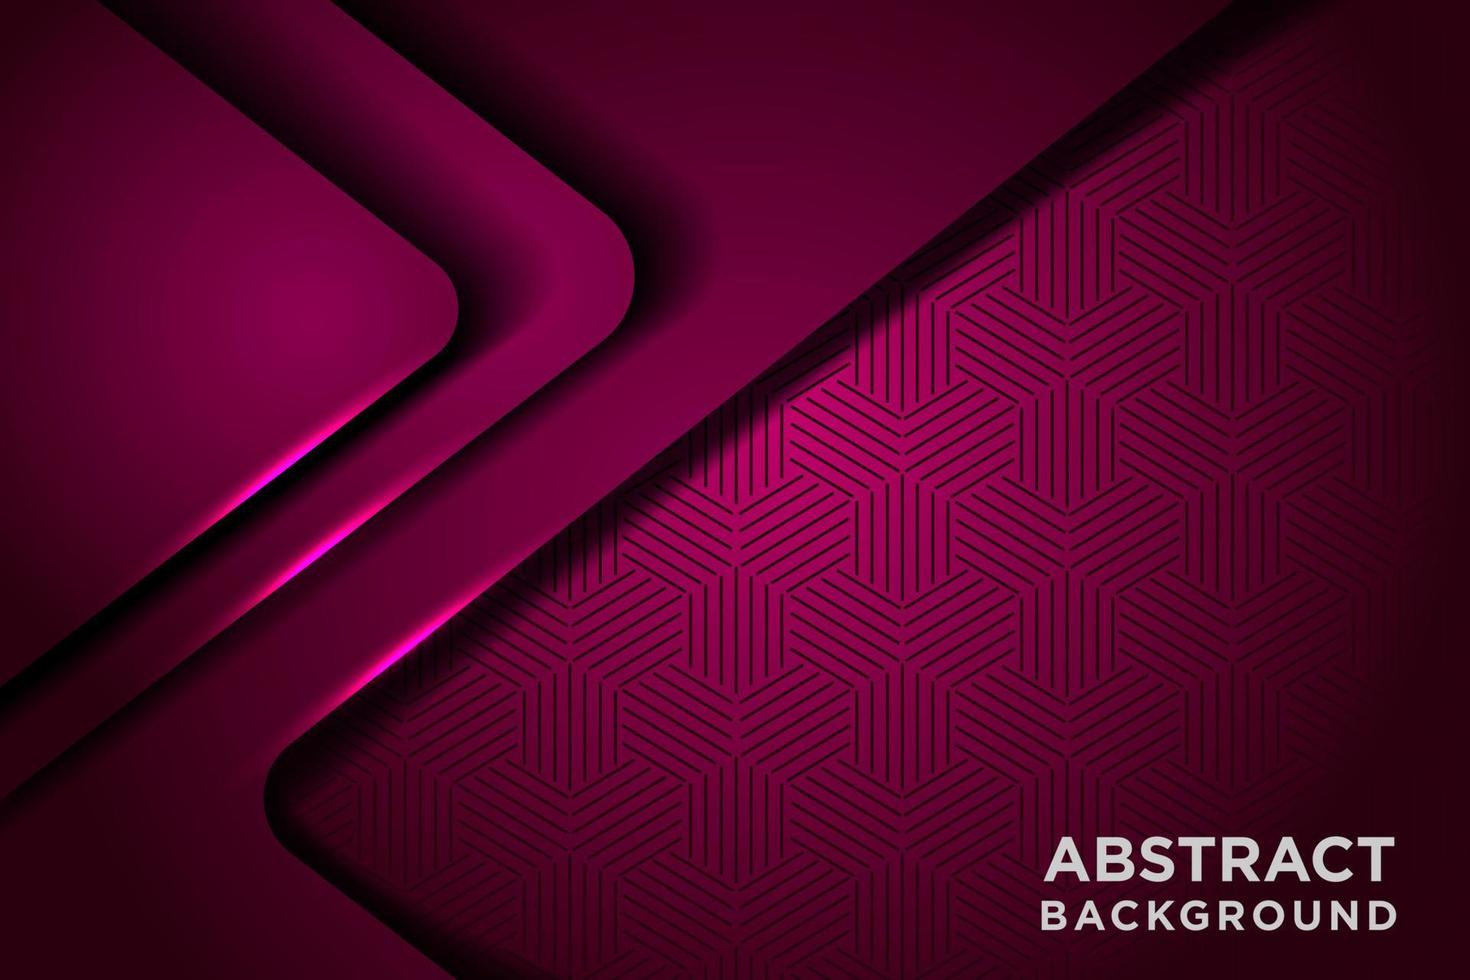 Abstract red pink overlap with pattern and text design modern luxury futuristic technology background vector illustration.